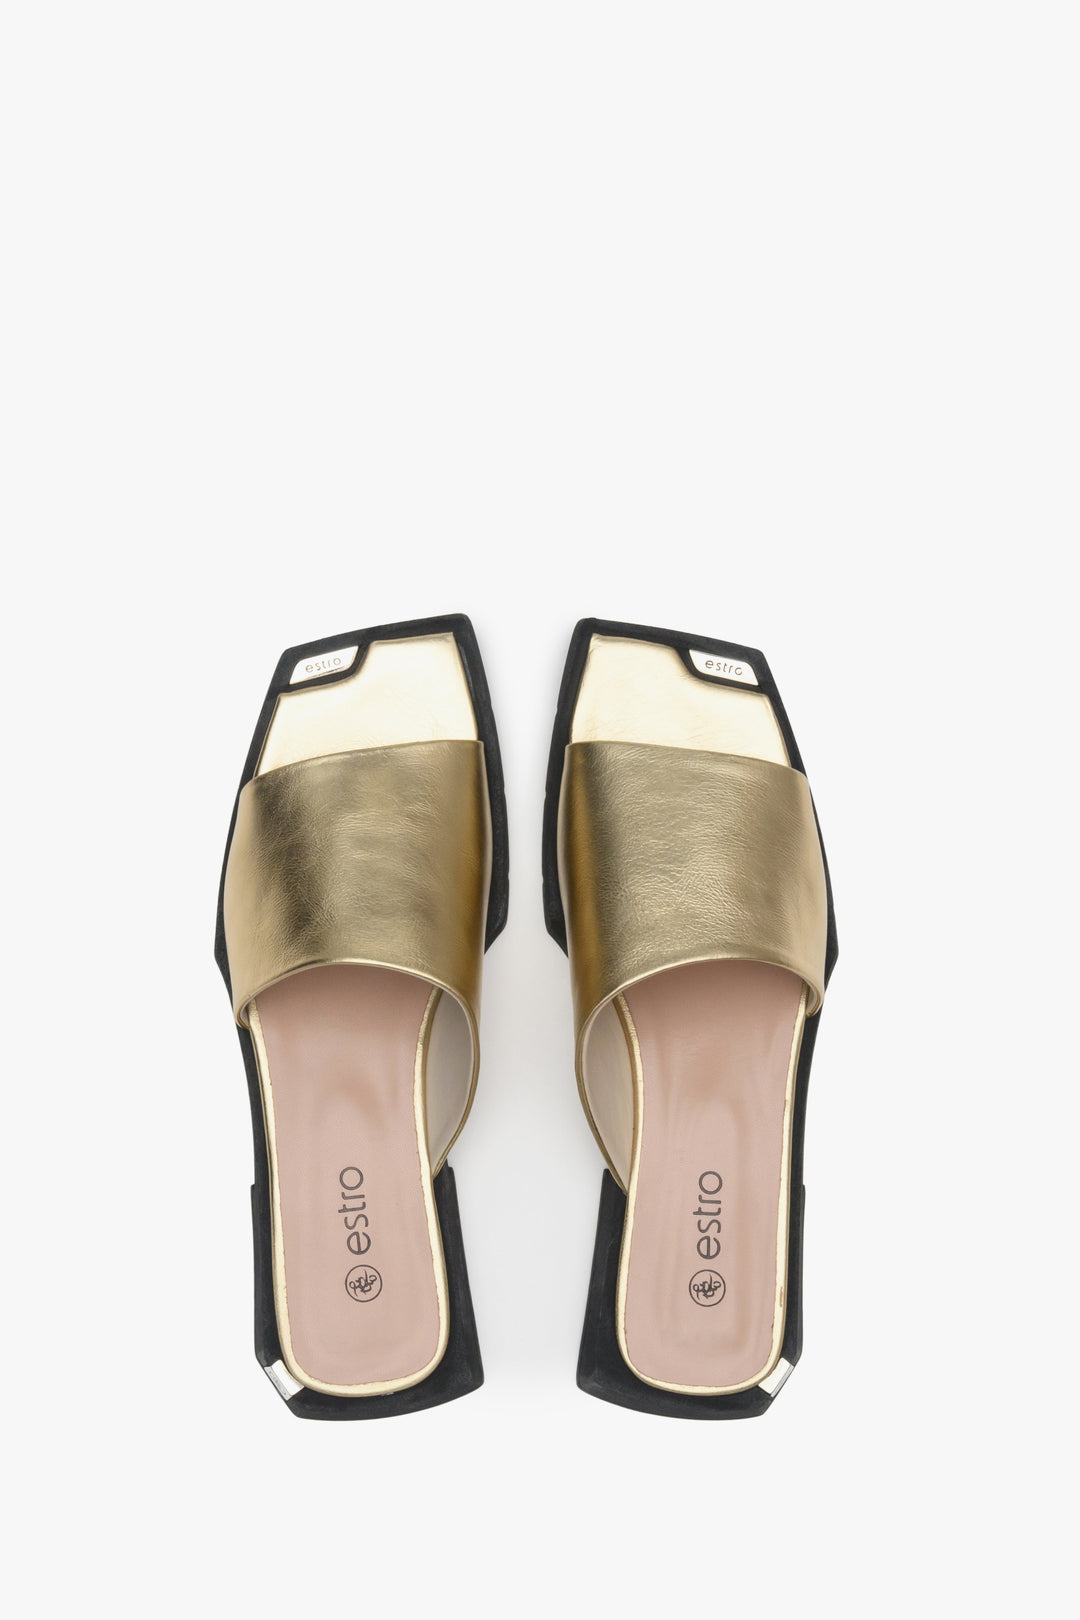 Women's leather mules for summer by Estro in gold color - presentation of shoes from above.